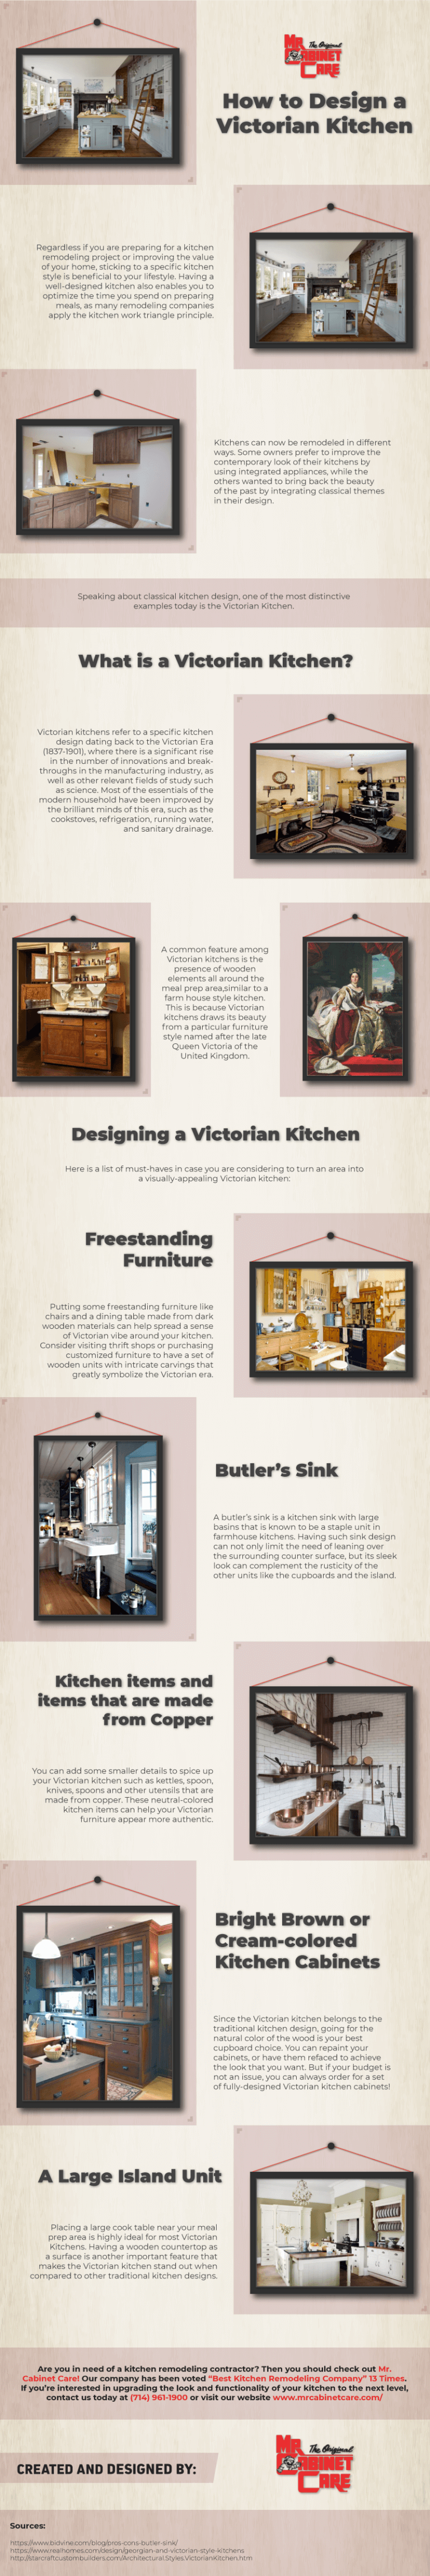 How-to-Design-a-Victorian-Kitchen